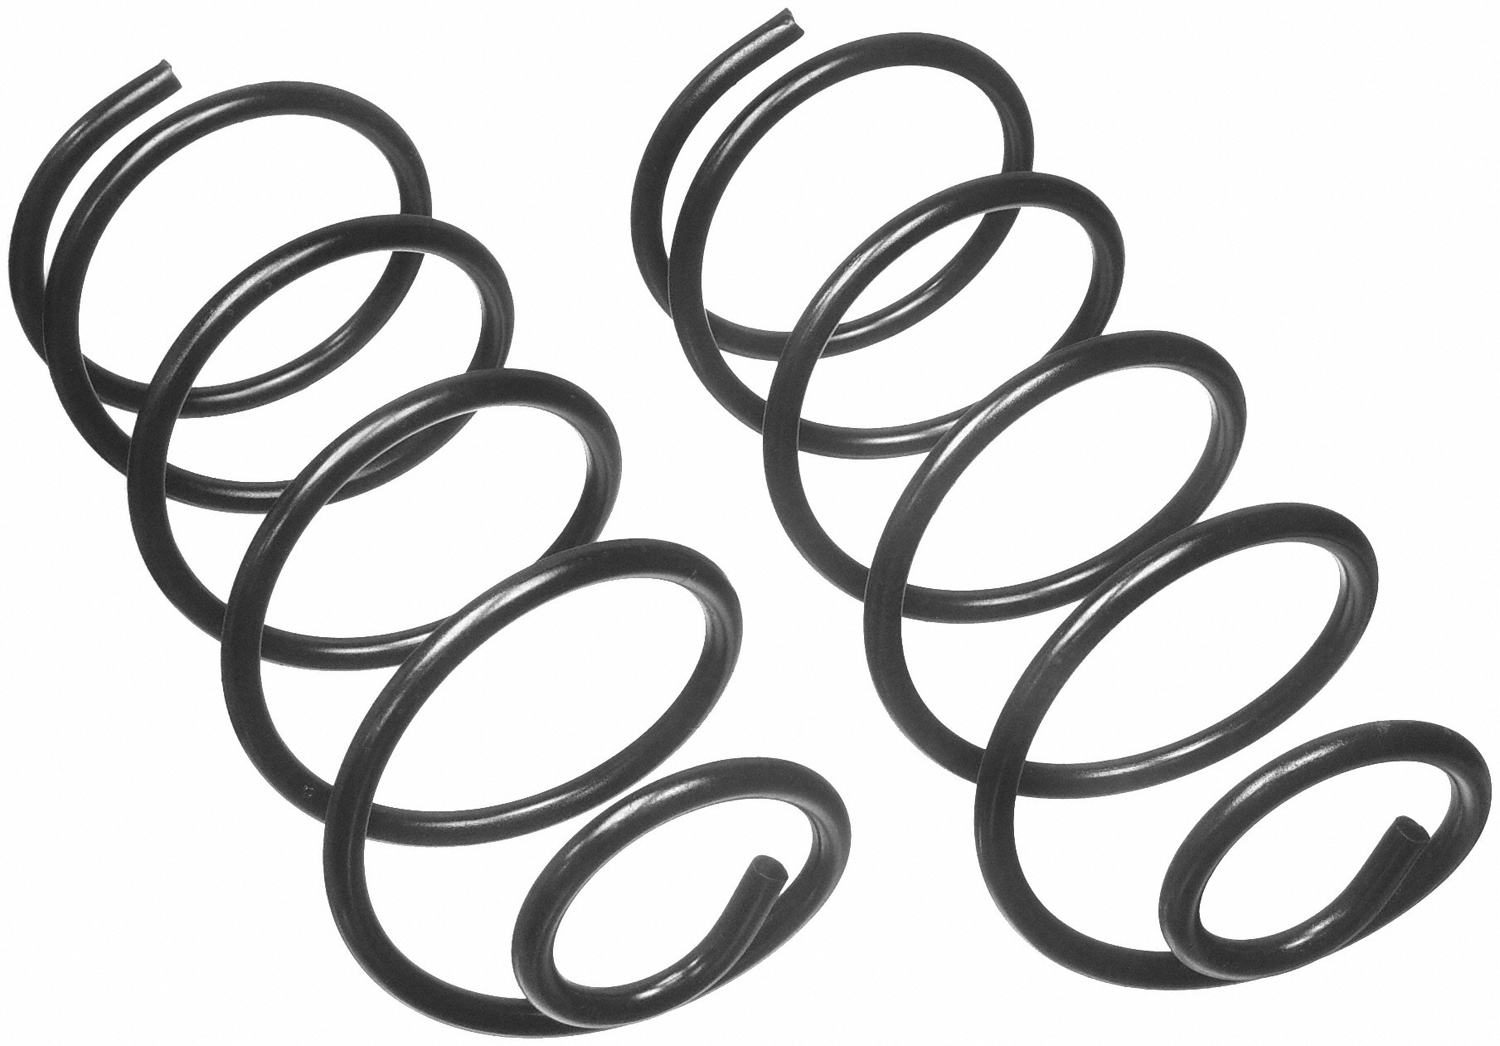 Image of ID 6454 Moog 6454 Coil Spring Set Fits 1984-1989 Chevrolet P20